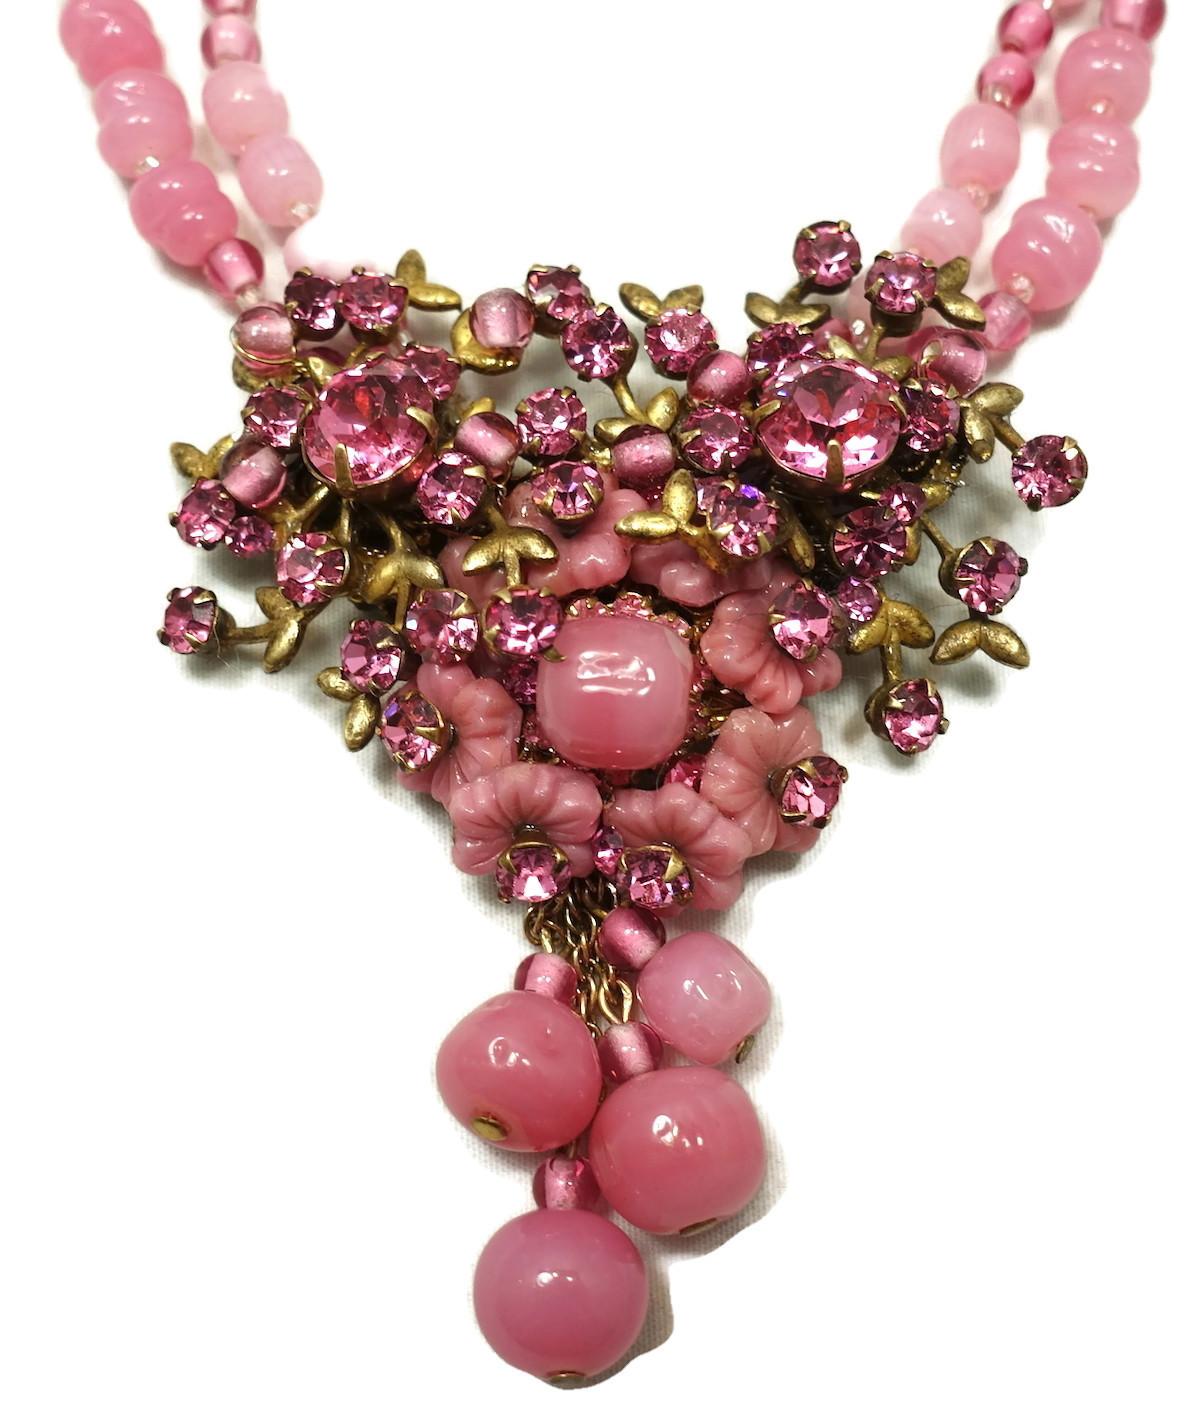 Early Vintage Miriam Haskell Rare Glass Bead & Faux Pearl Necklace & Earrings In Good Condition For Sale In New York, NY